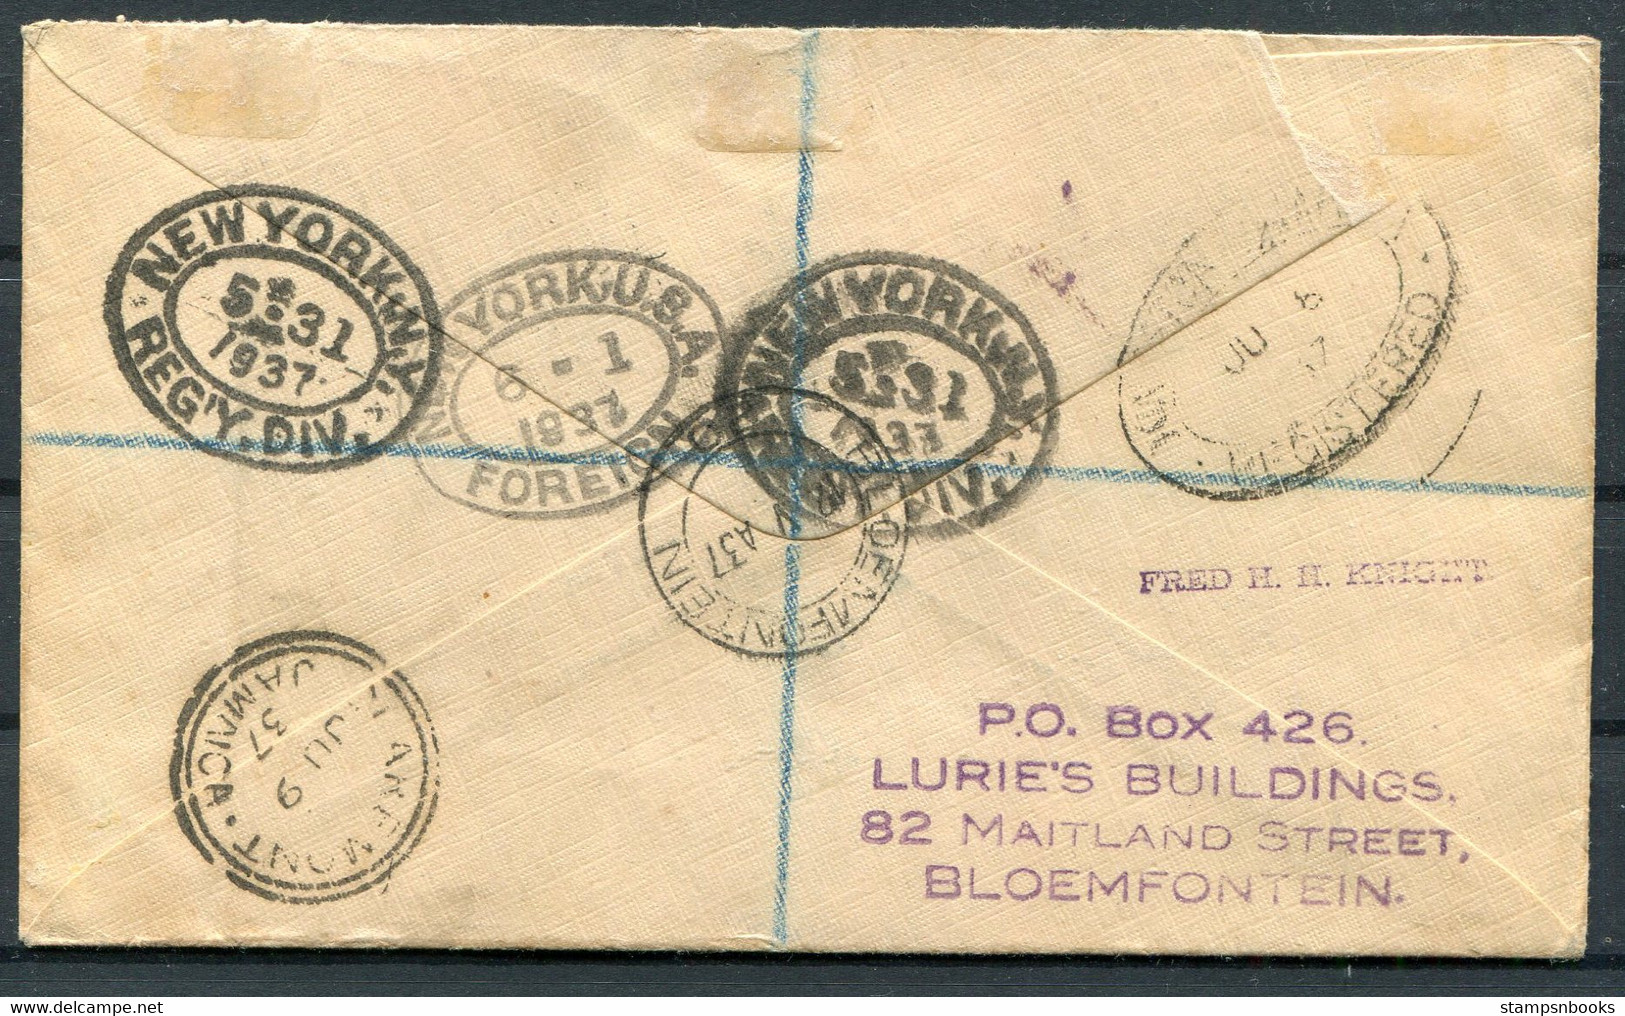 1937 South Africa Coronation First Day Cover, Registered Airmail Bloemfontein - Claremont Jamaica - Poste Aérienne